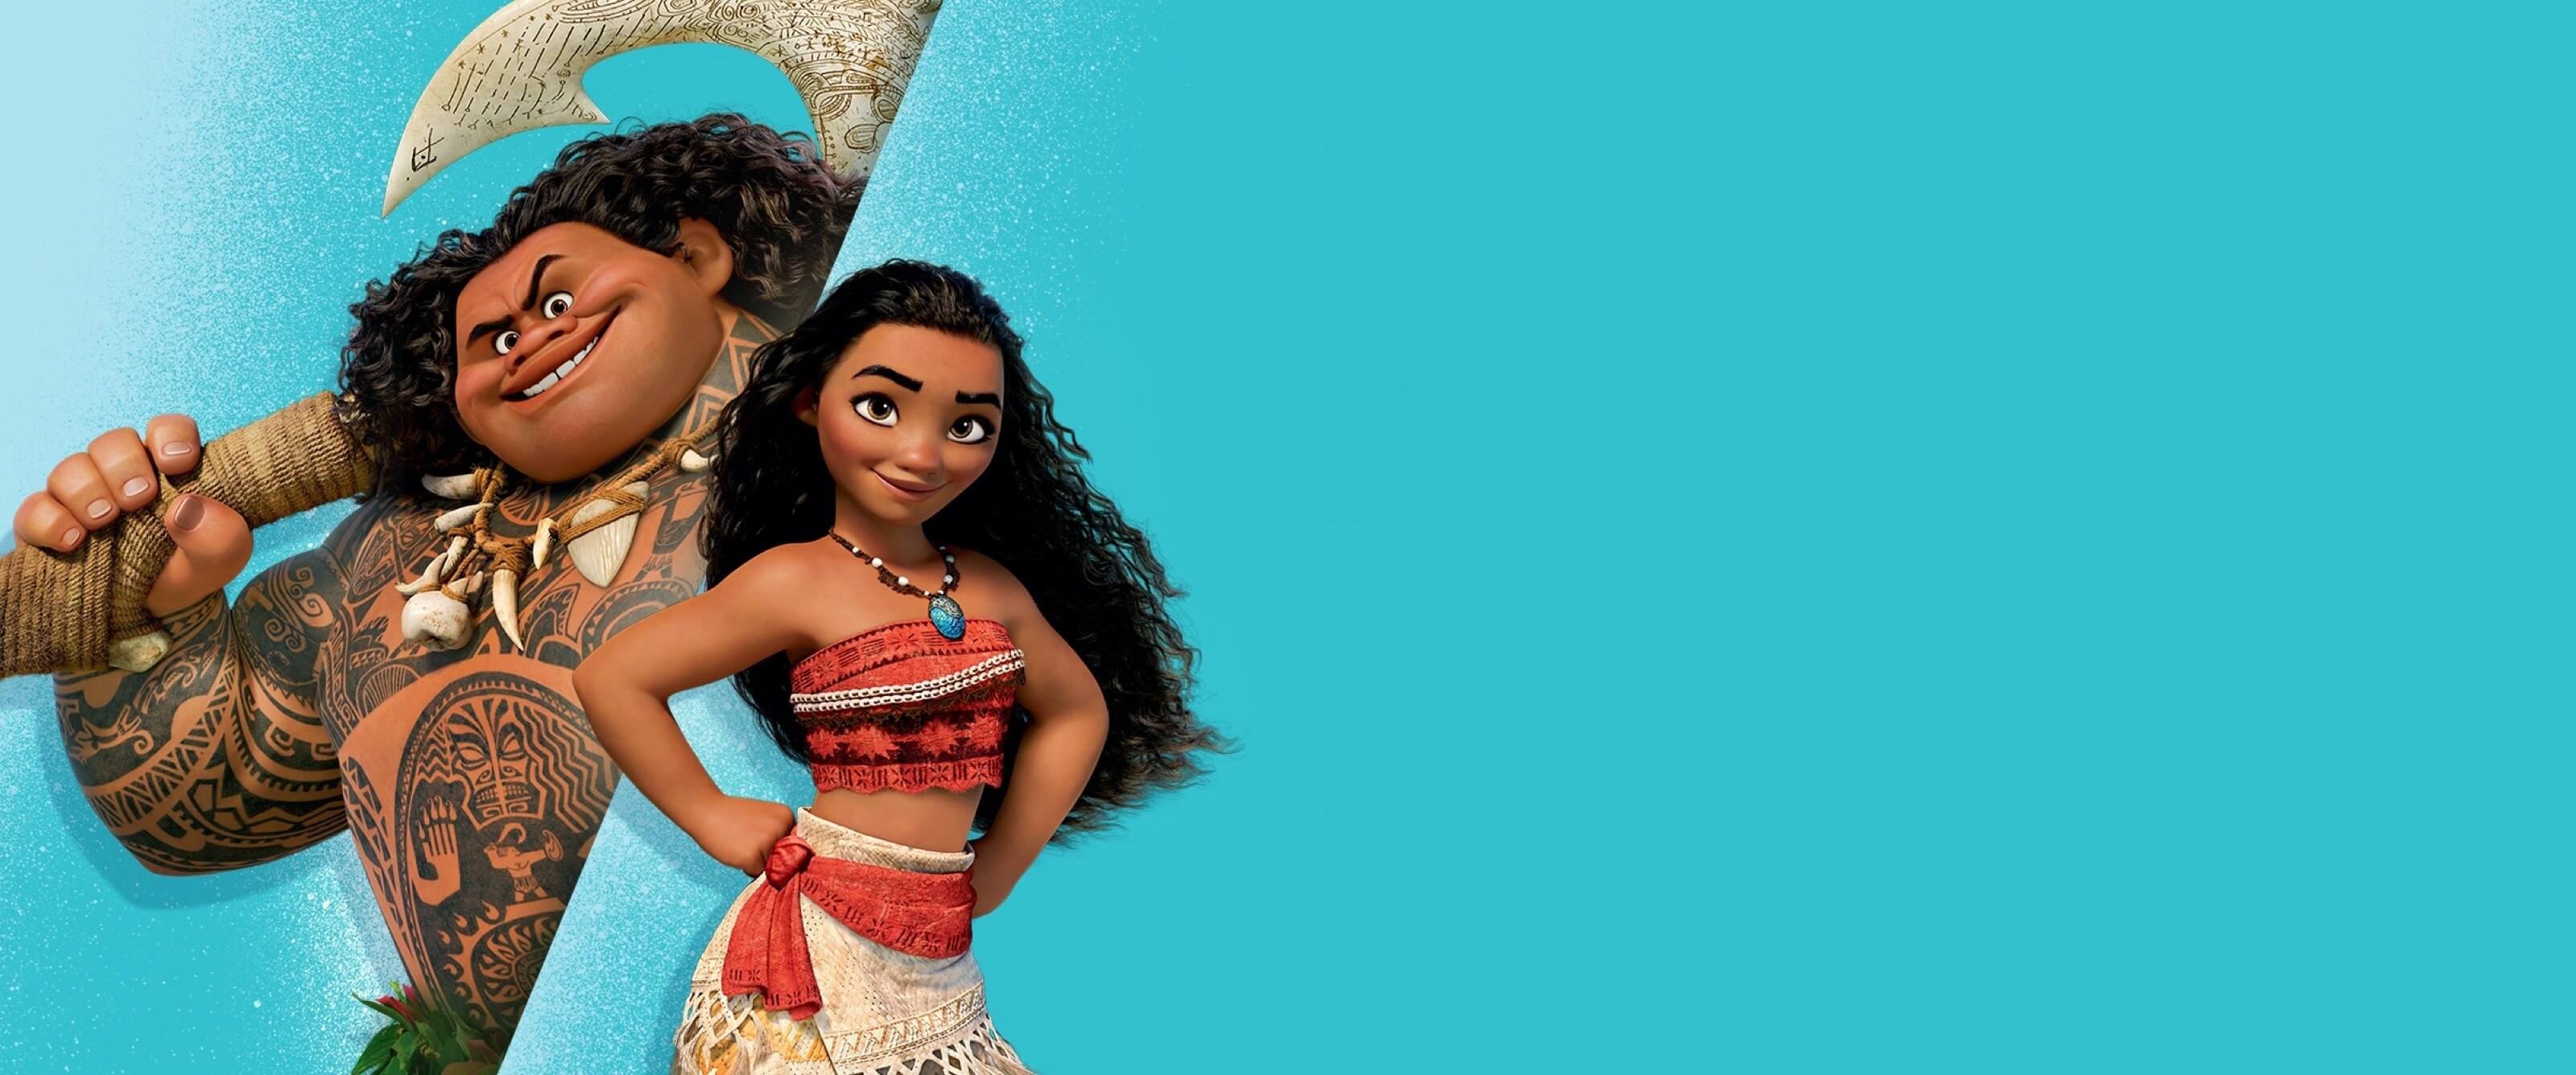 All you Need for a Moana Party